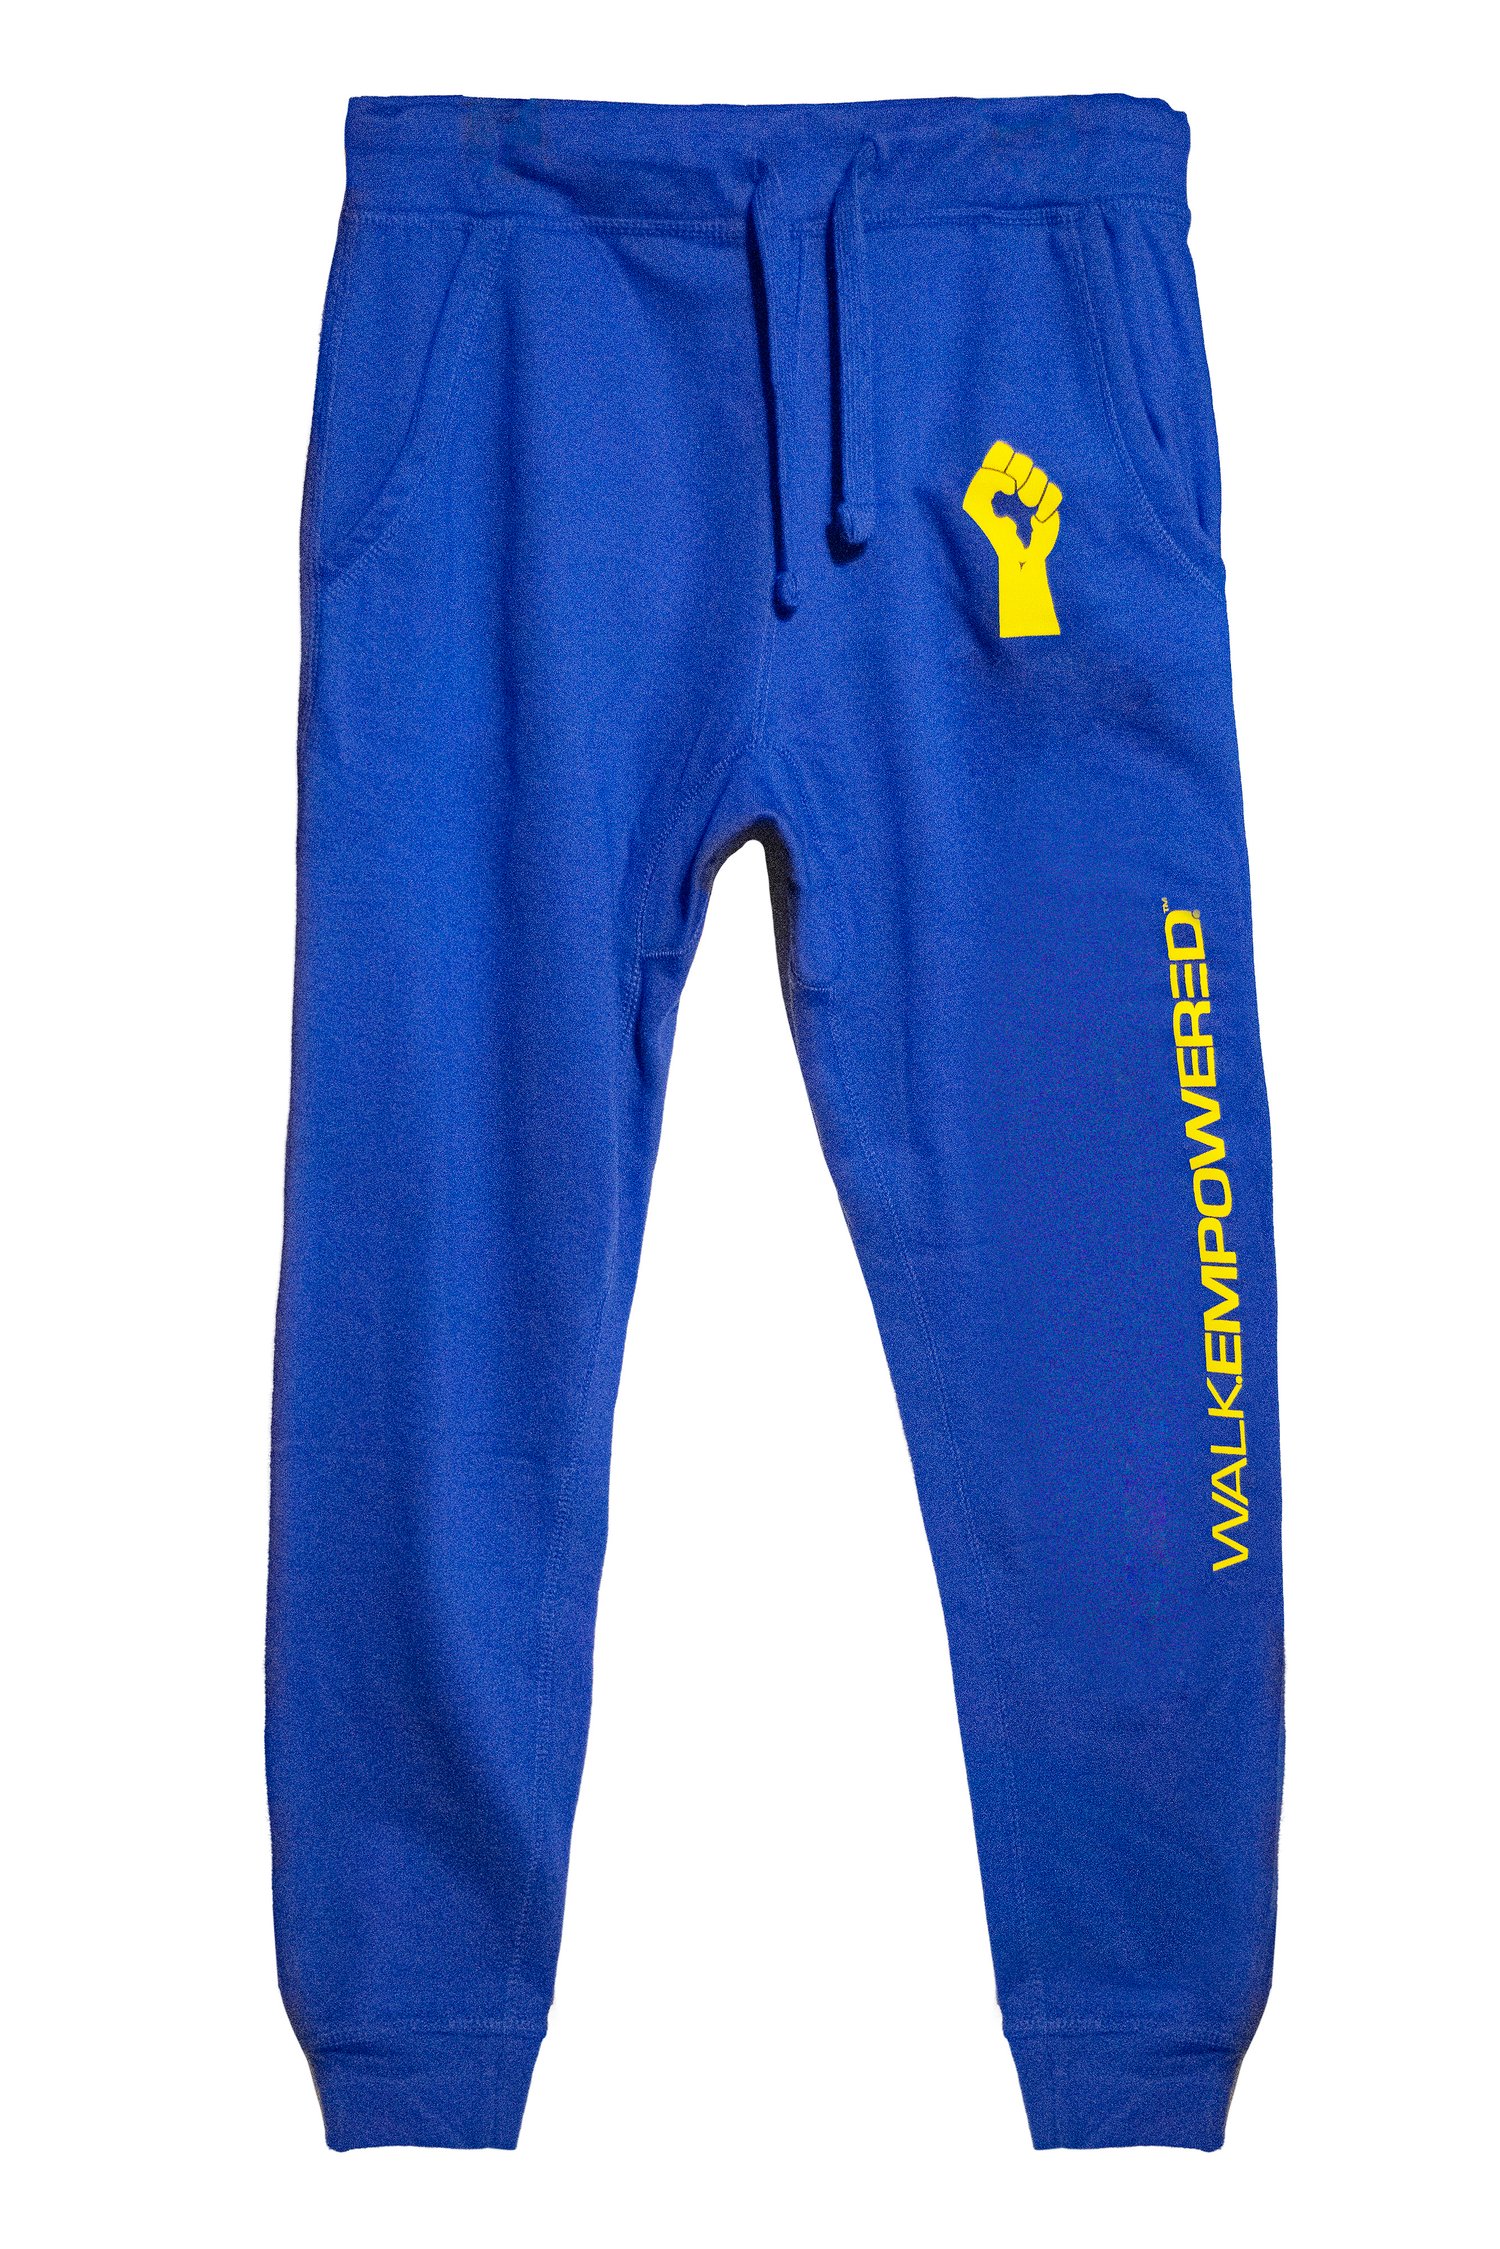 Image of RAMS JOGGERS